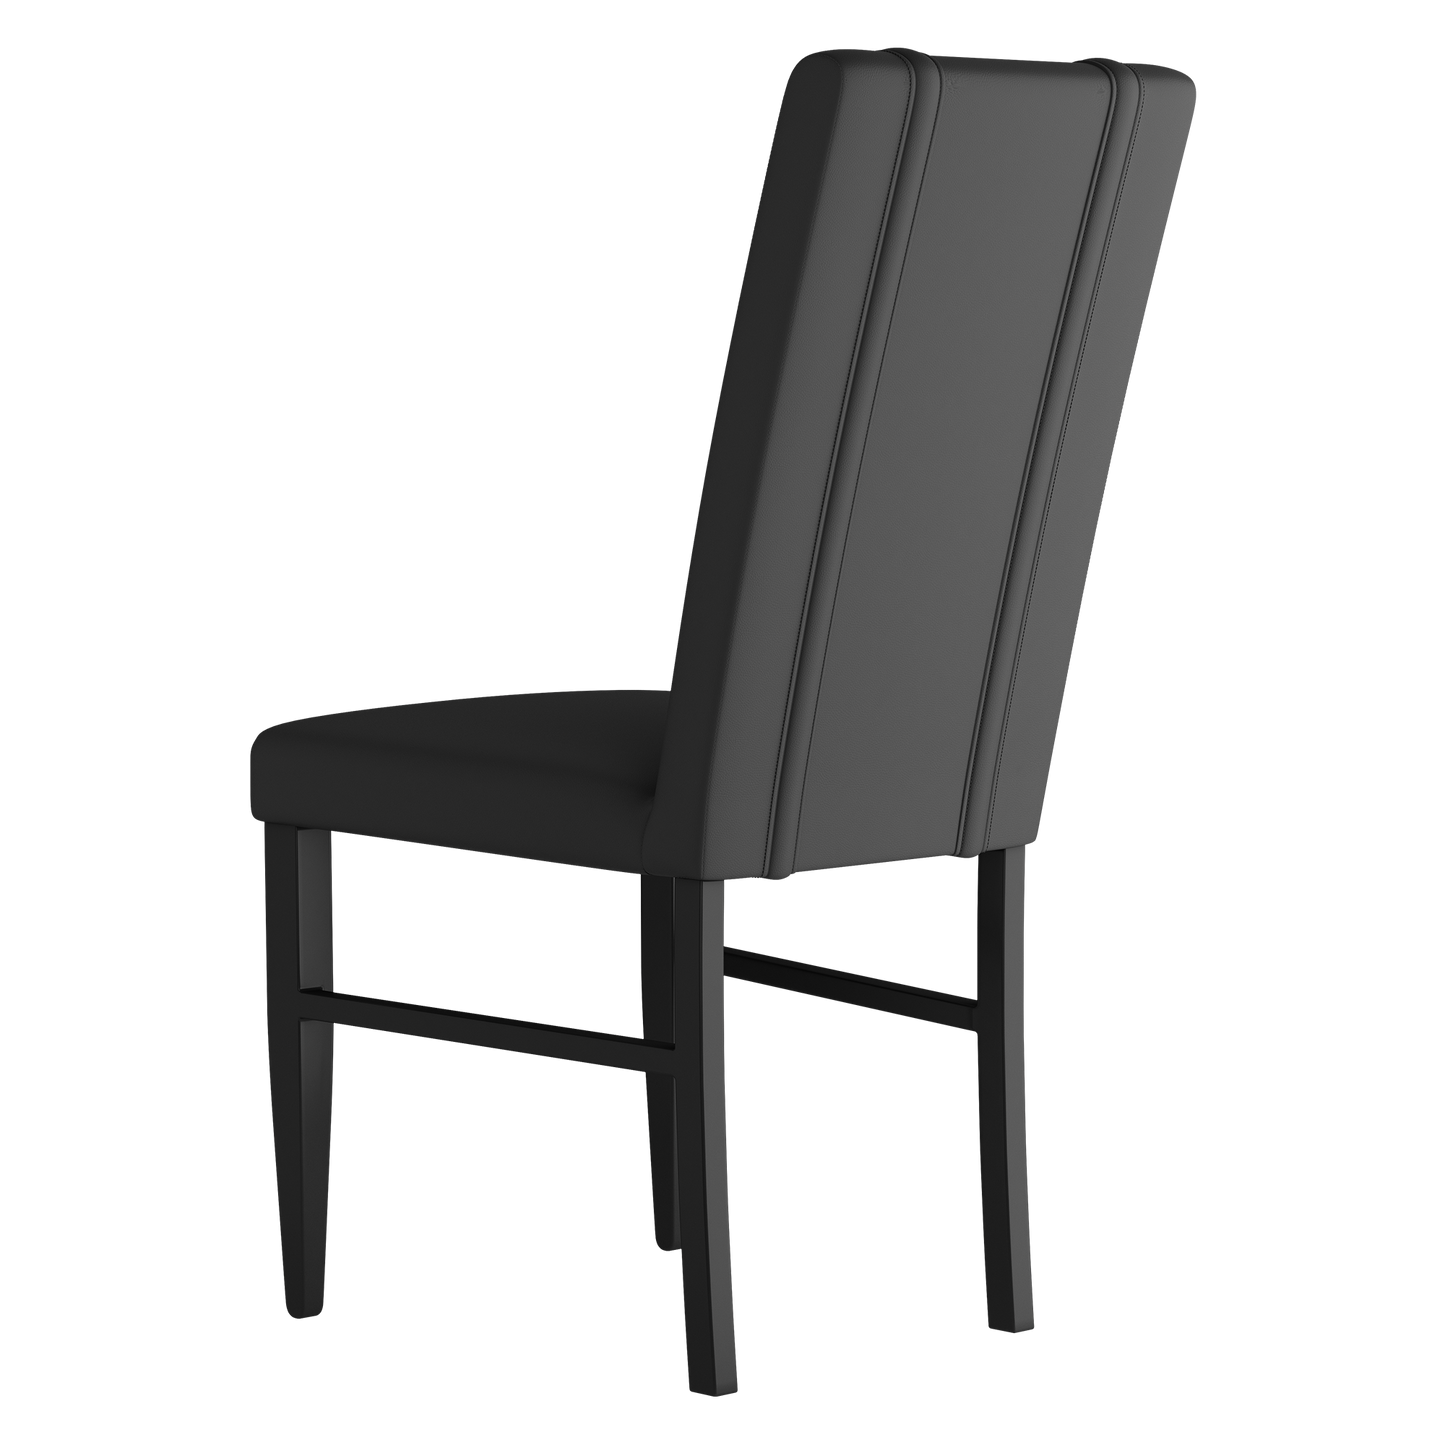 Side Chair 2000 with Chevrolet Alternate Logo Set of 2